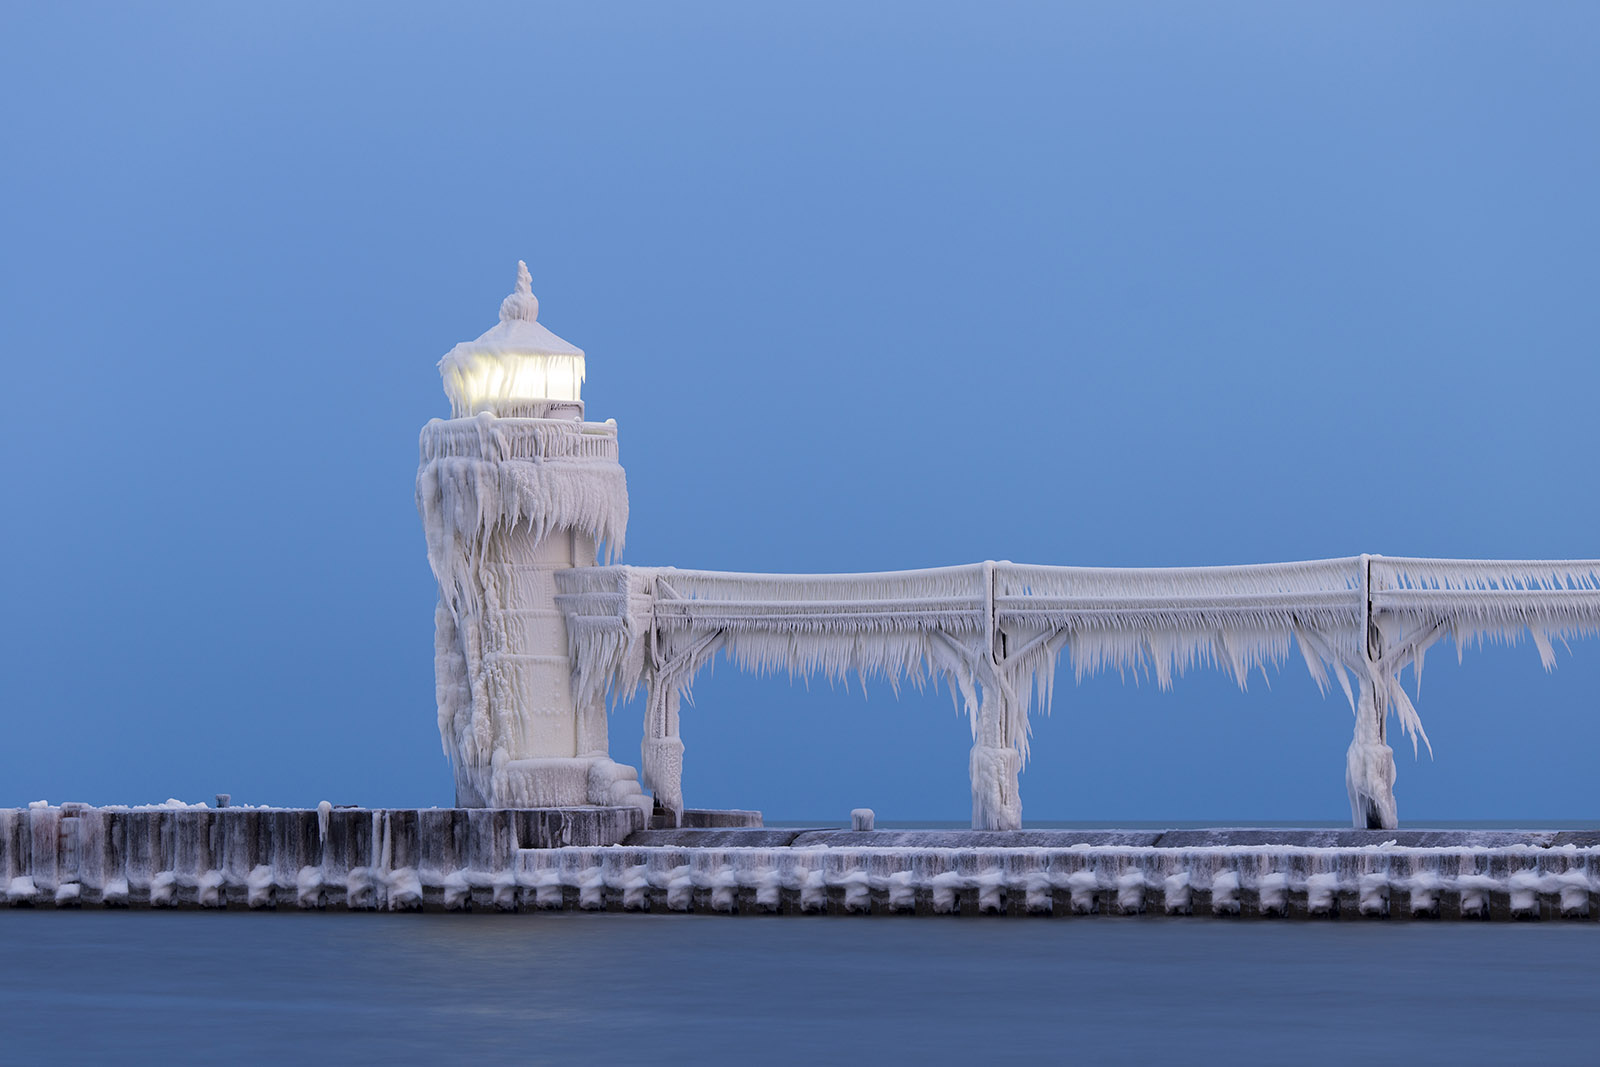 Outer lighthouse in St. Joseph, MI